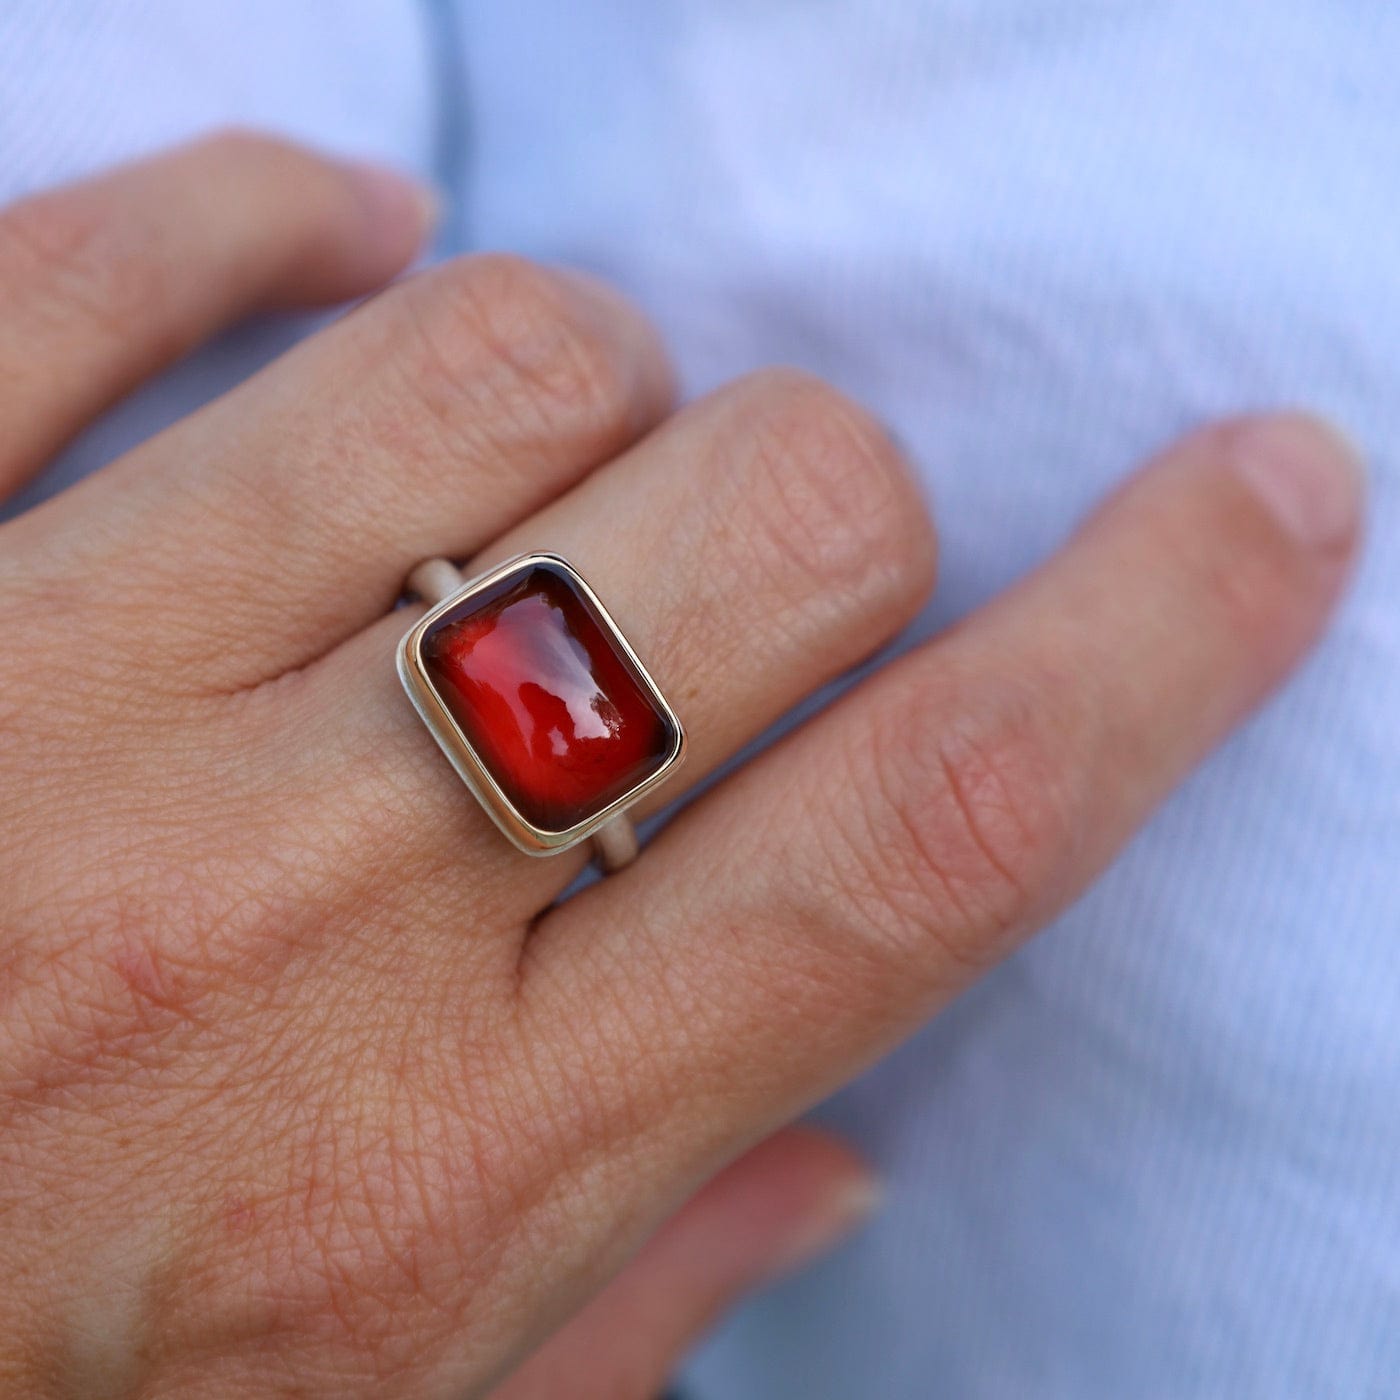 RNG-14K Sterling & 14K Gold Ring with Small Rectangular Smooth Hessonite Garnet